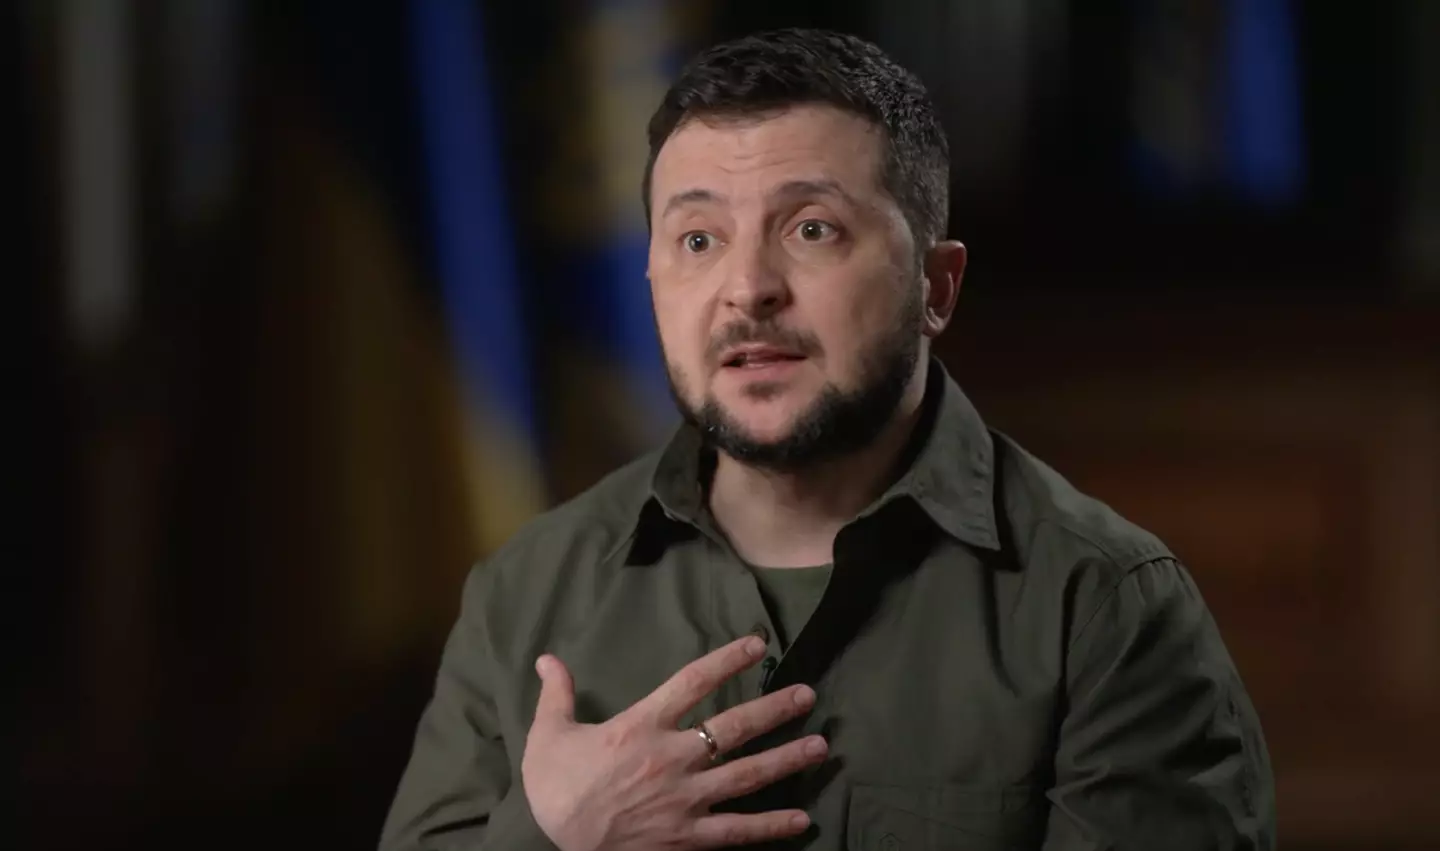 Ukraine is 'not ready to give away [its] country' according to President Volodymyr Zelenskyy.